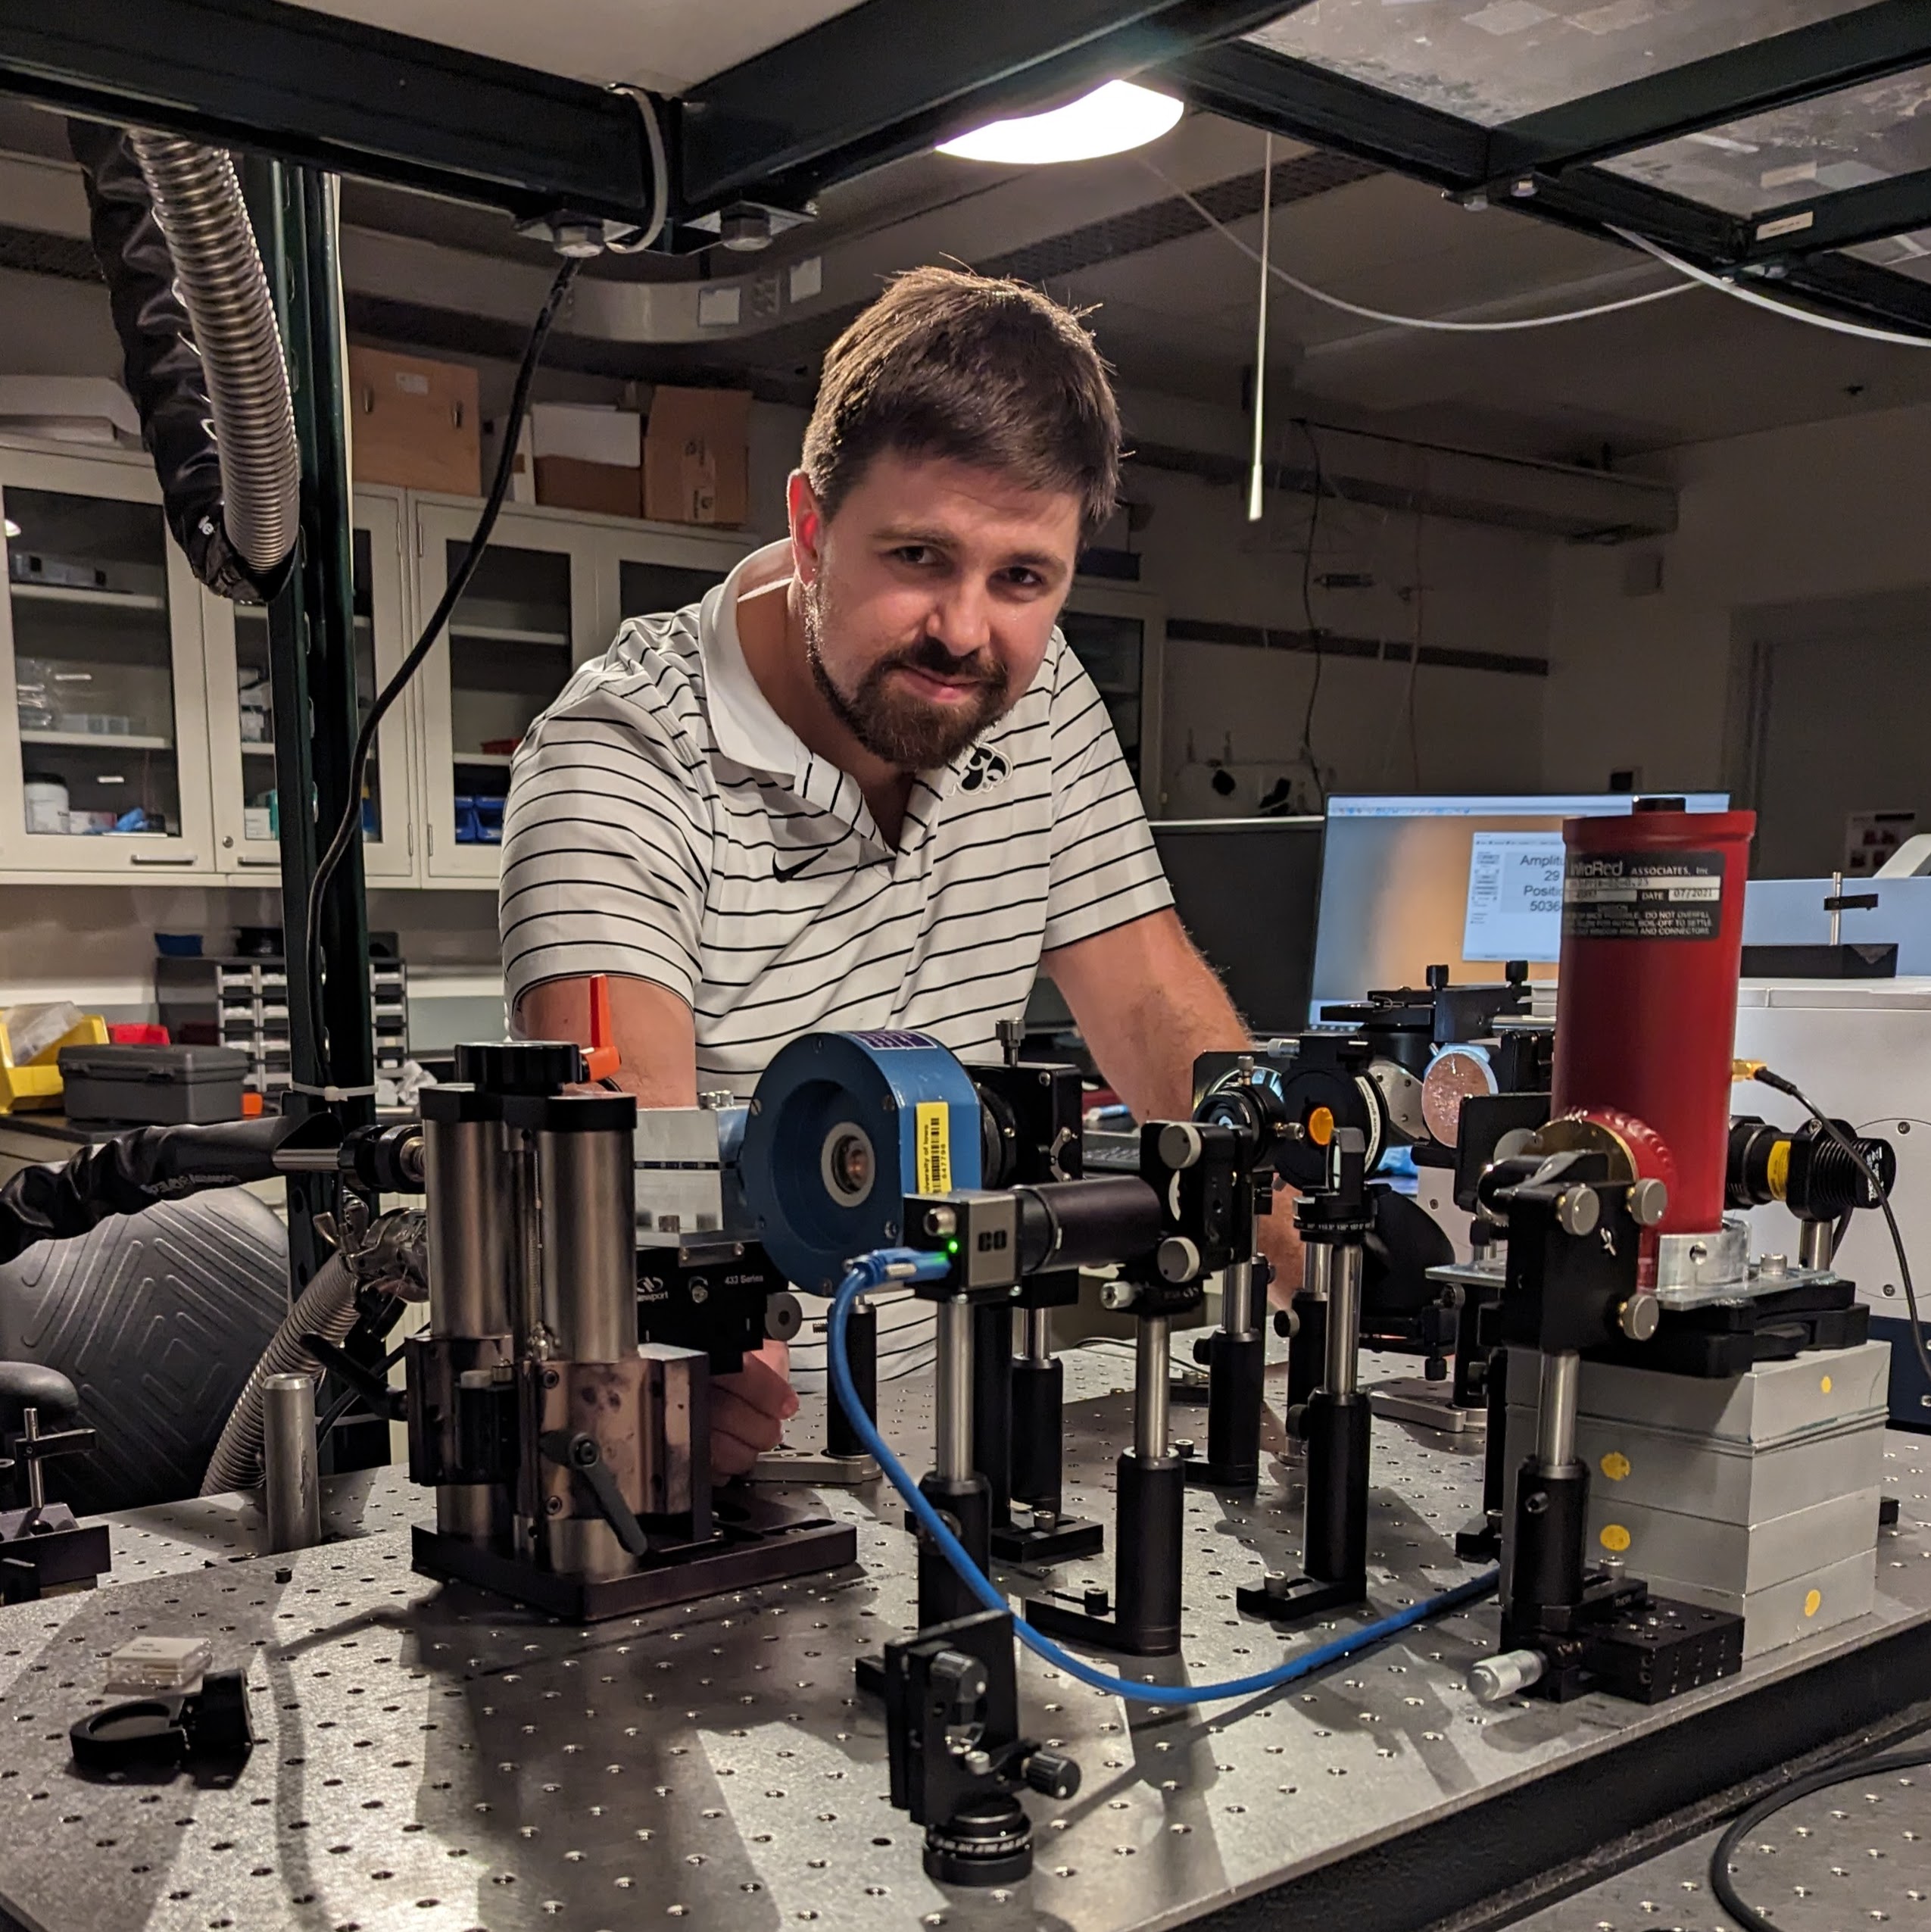 A photo of Tom Folland, an assistant professor in the Department of Physics and Astronomy in the College of Liberal Arts and Sciences.